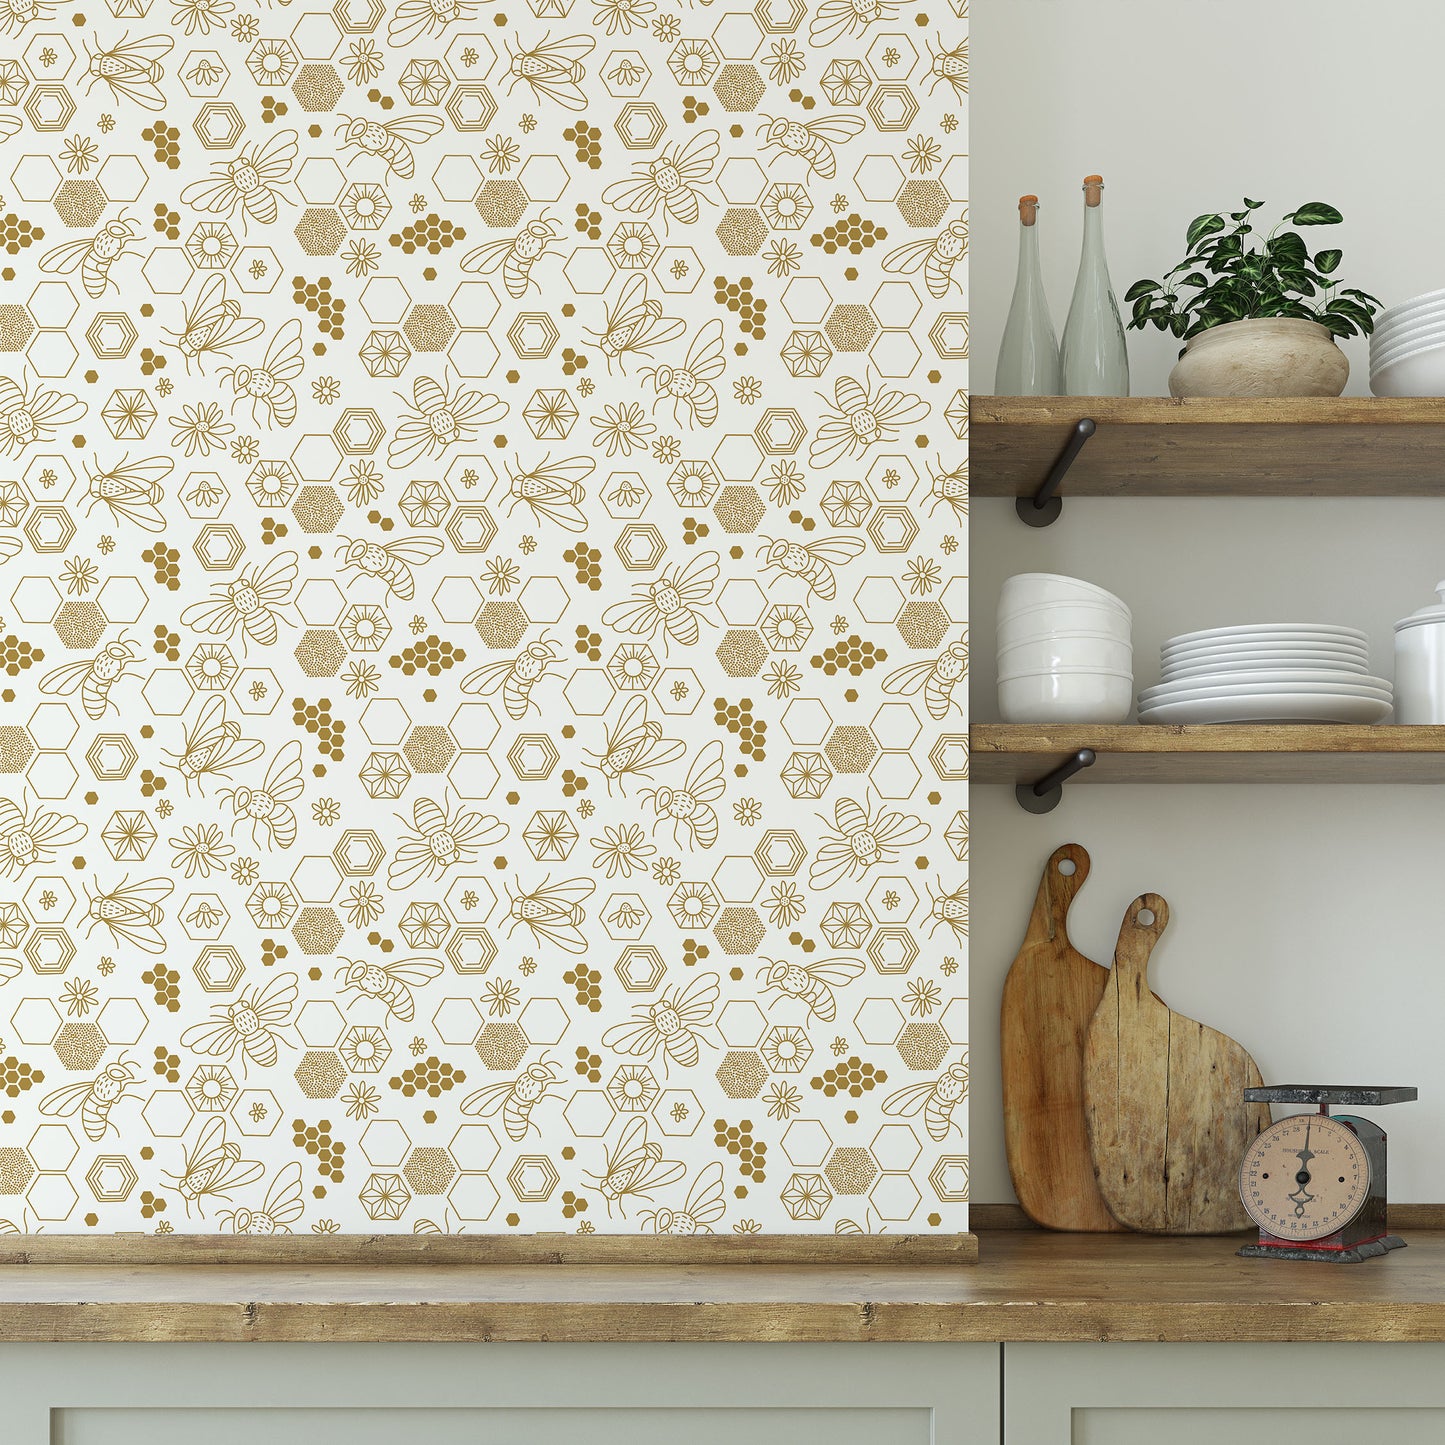 Cute honey bee and honeycomb geometric gold/yellow pattern on white background easy to install and remove peel and stick custom wallpaper available in different lengths/sizes locally created and printed in Canada Artichoke wallpaper. Washable, durable, commercial grade, removable and waterproof.